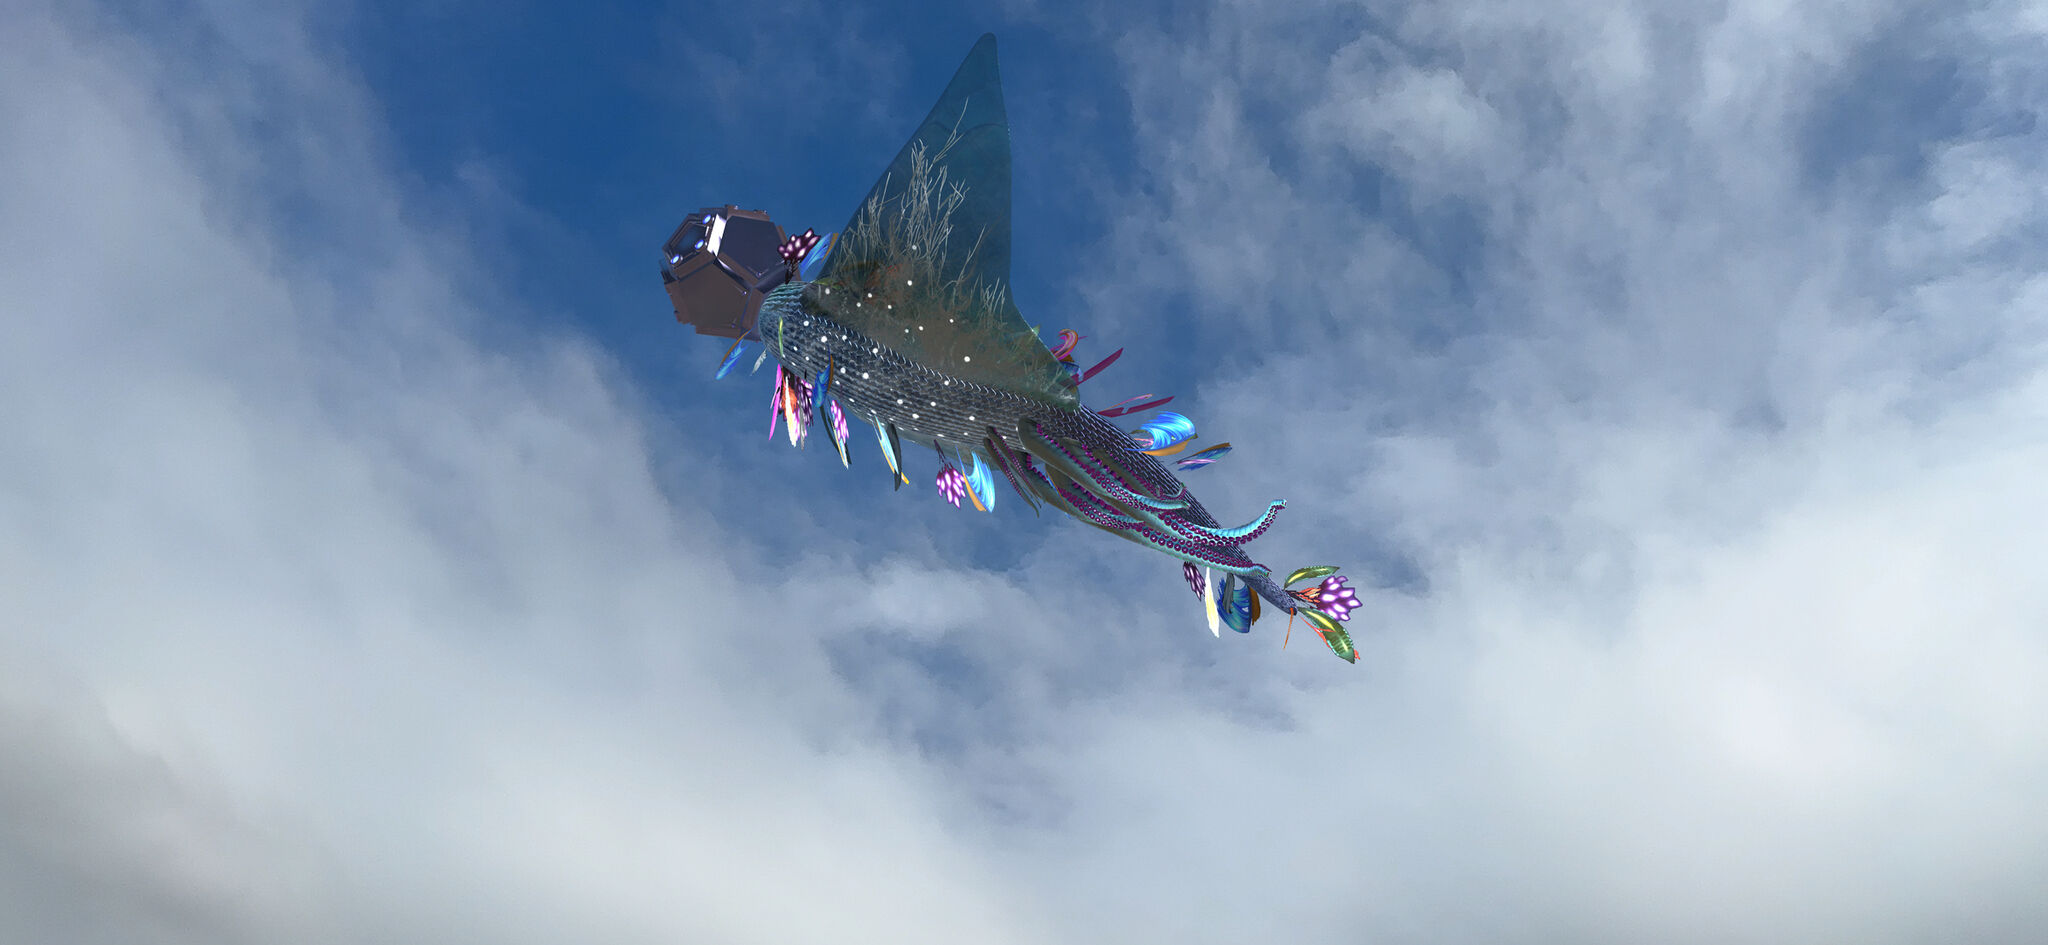 A creature hovering within the clouds on a sunny day.